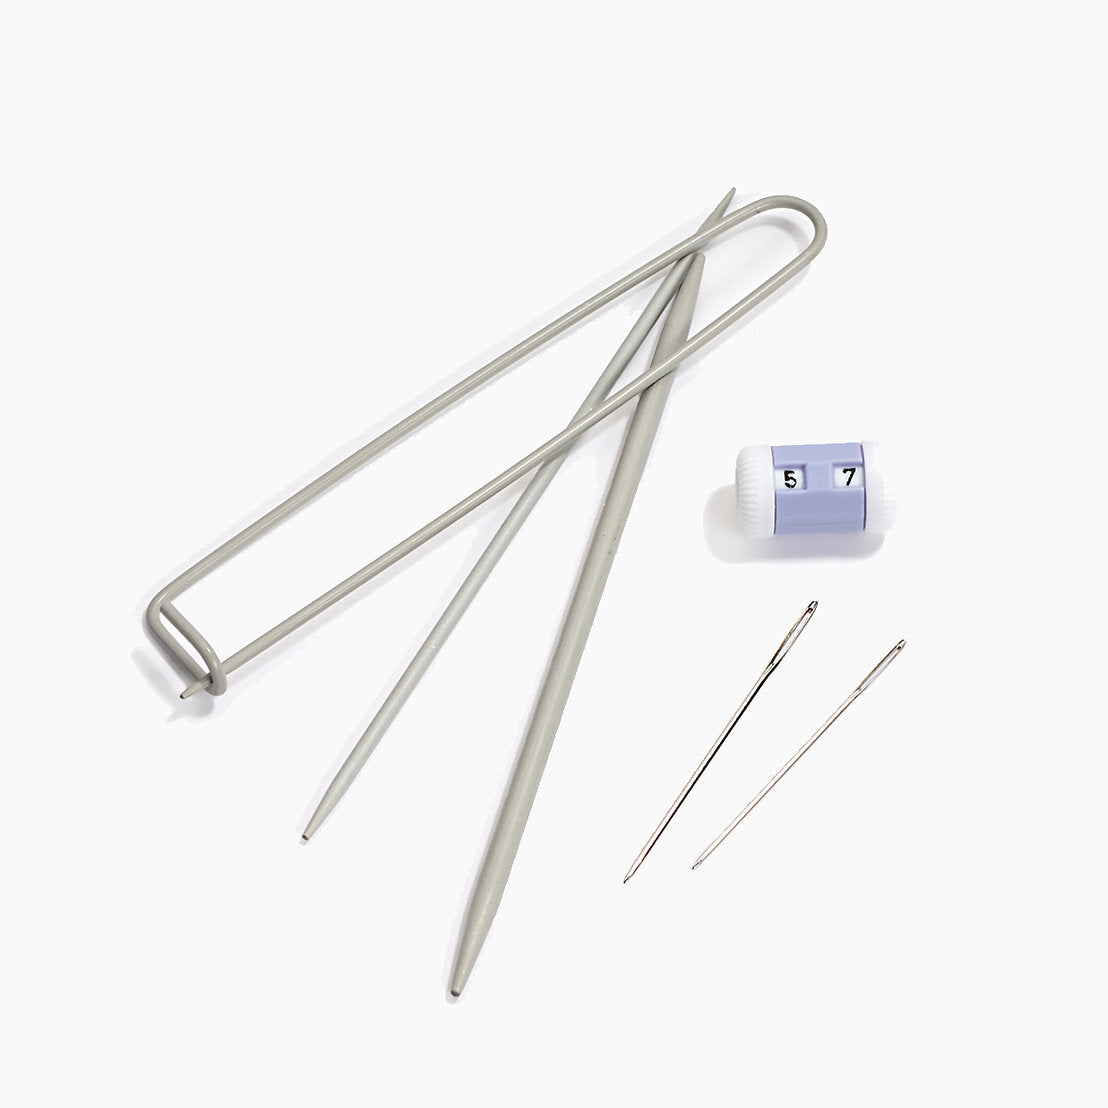 Prym Knitting Accessory Kit 225150 - Essential tools for your knitting projects